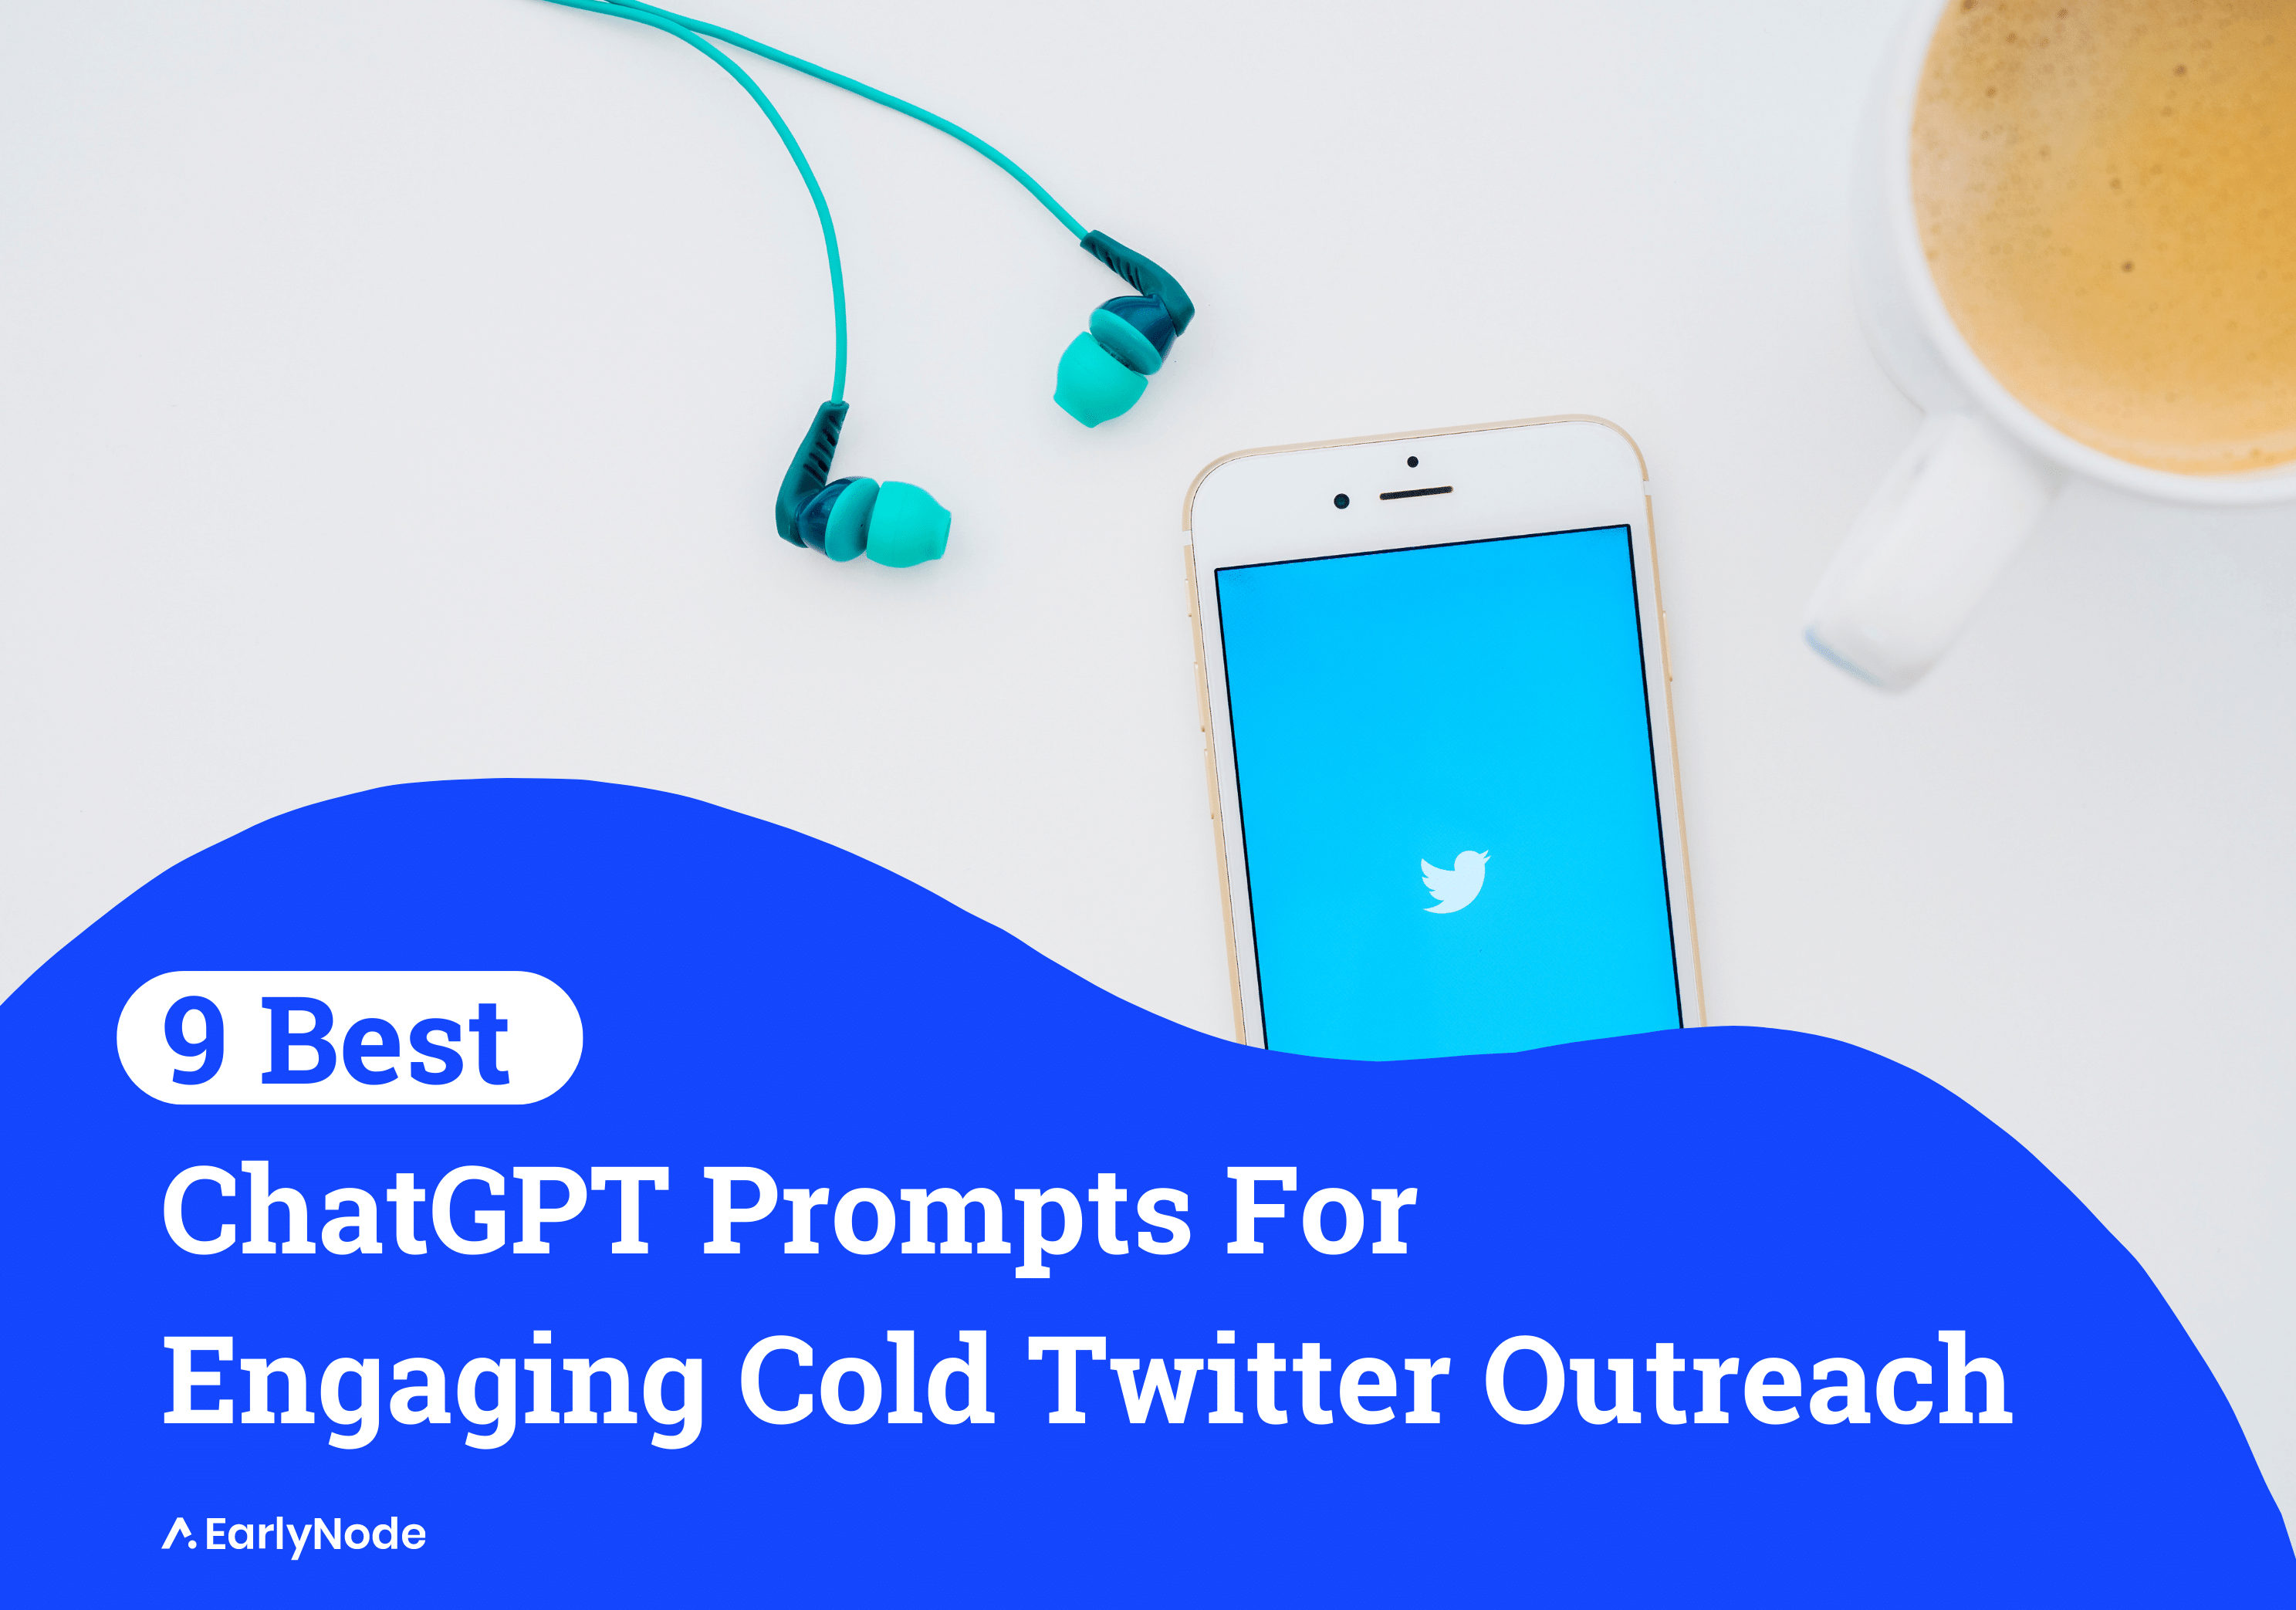 9 ChatGPT Prompts For Better Cold Outreach via Twitter